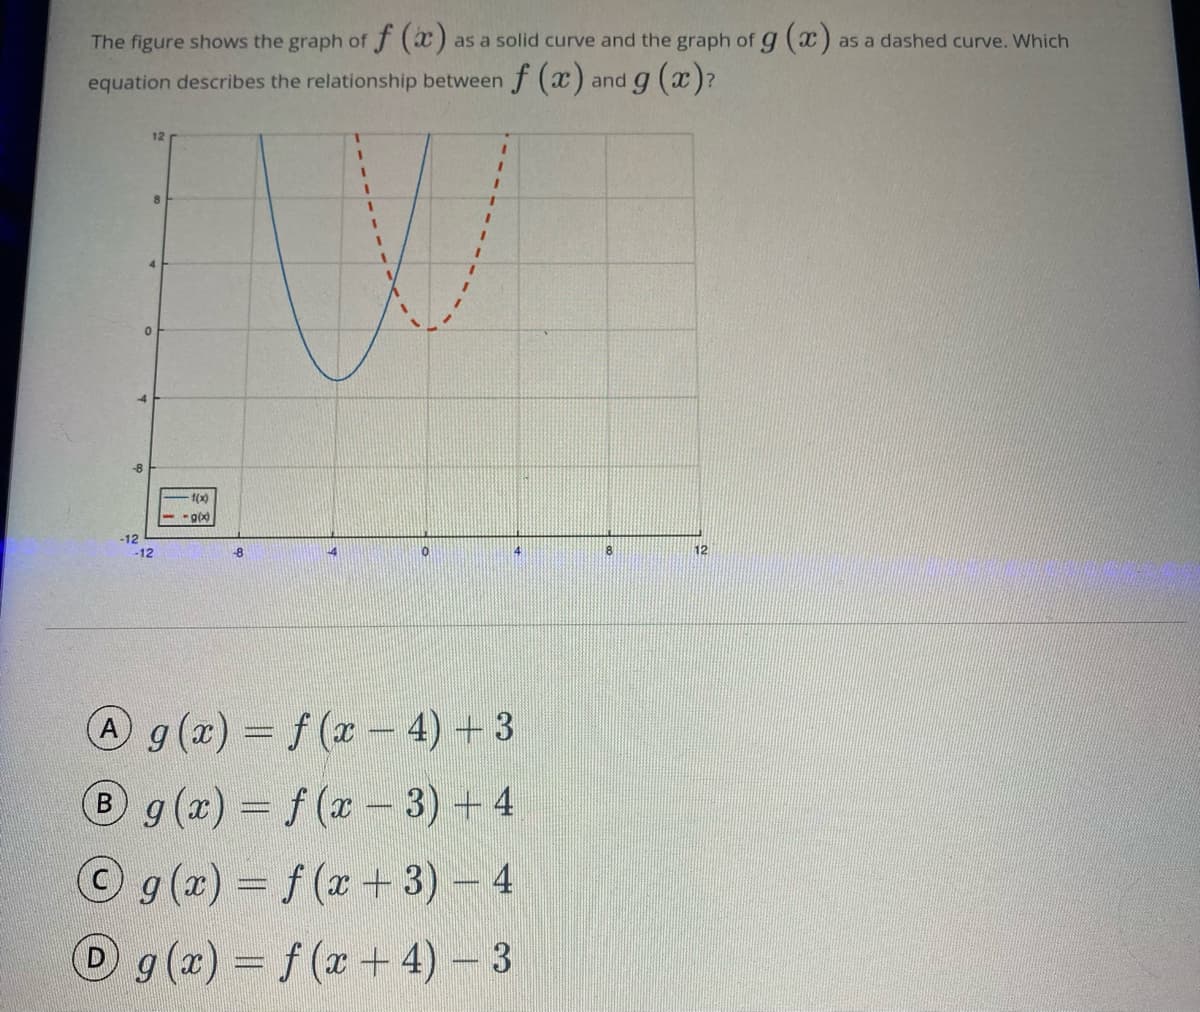 The figure shows the graph of f (x)
as a solid curve and the graph of g (x)
as a dashed curve. Which
equation describes the relationship betweenf (x)
and g (x)?
1.
1(x)
-12
-12
-8
4
8
12
Ag (x) f (x- 4) +3
Bg(x) f (x3) + 4
© g(x) = f (x+ 3) – 4
D g (x) = f (x + 4) – 3
